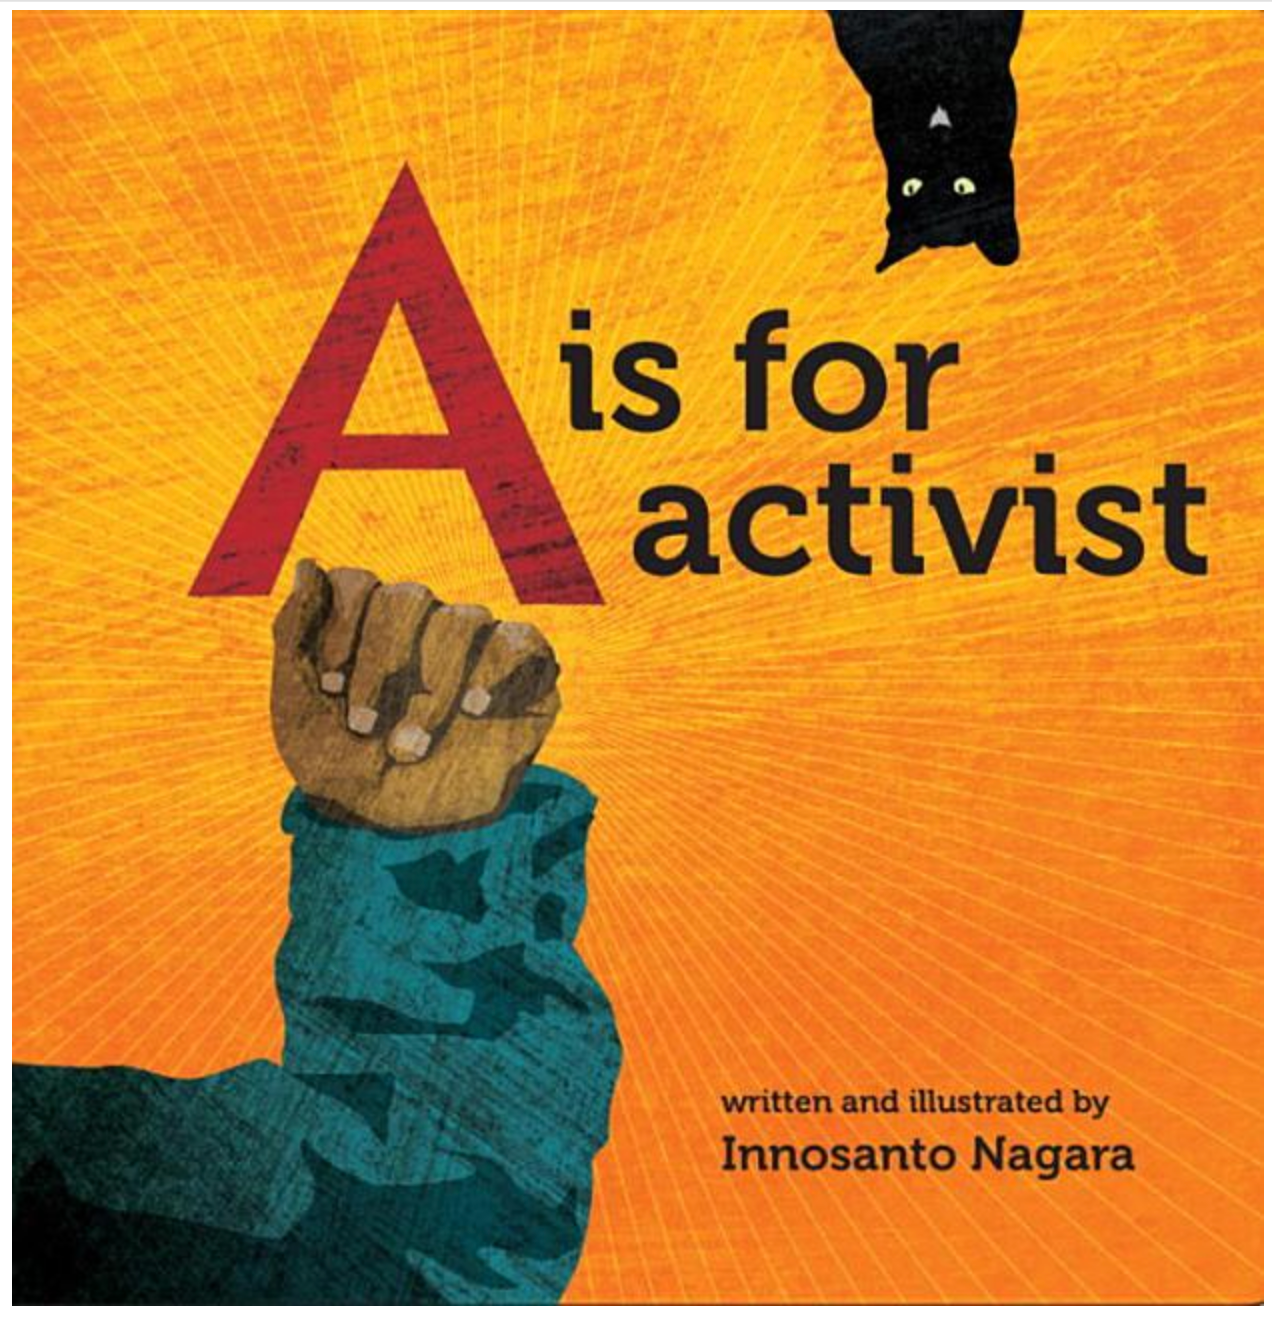 Cover of A is for Activist board book with a cat, a fist and the letter A